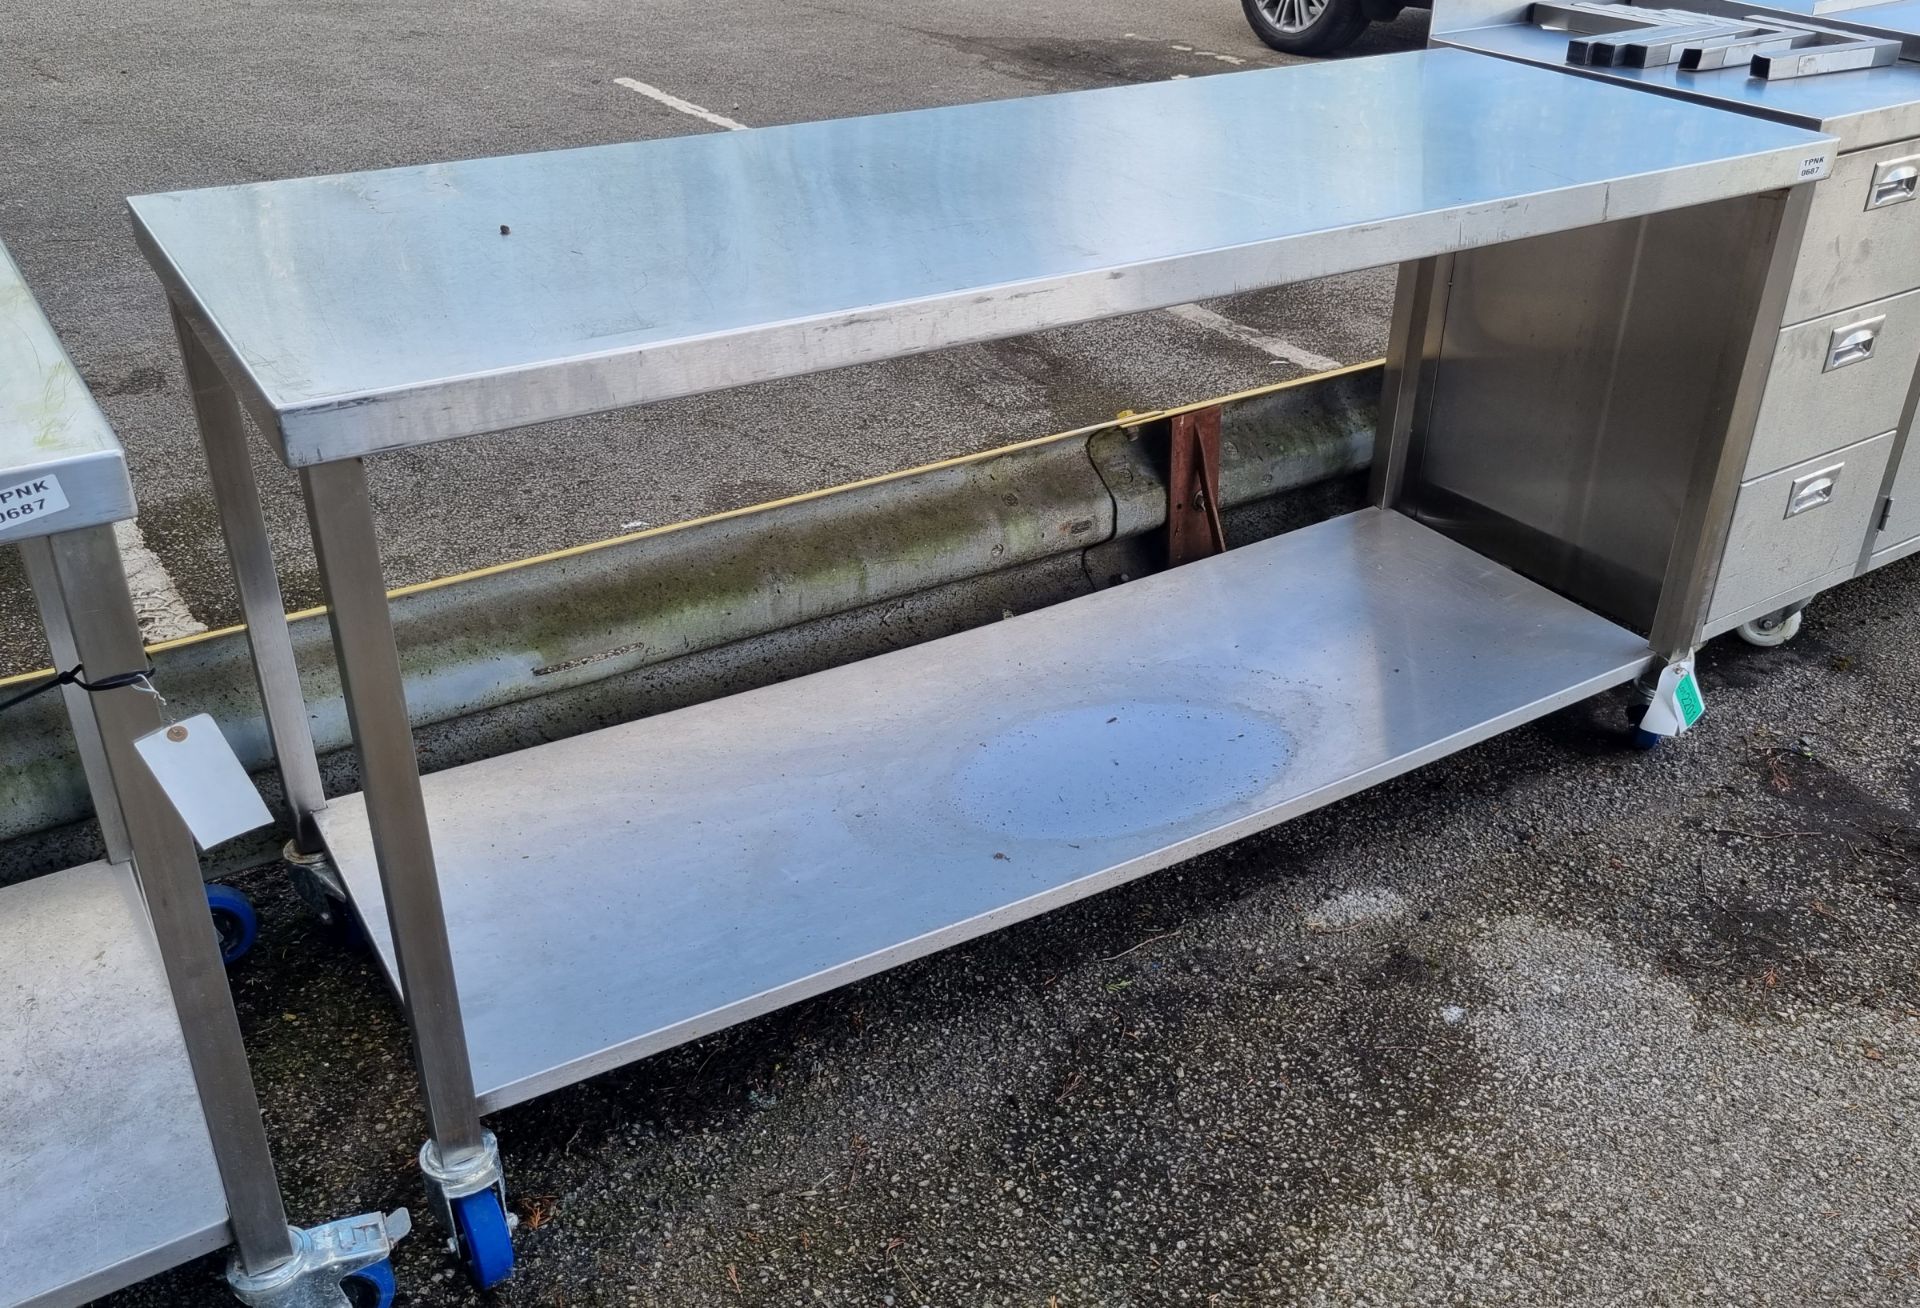 Stainless steel table on wheels - L180 x W65 x H89cm - Image 2 of 3